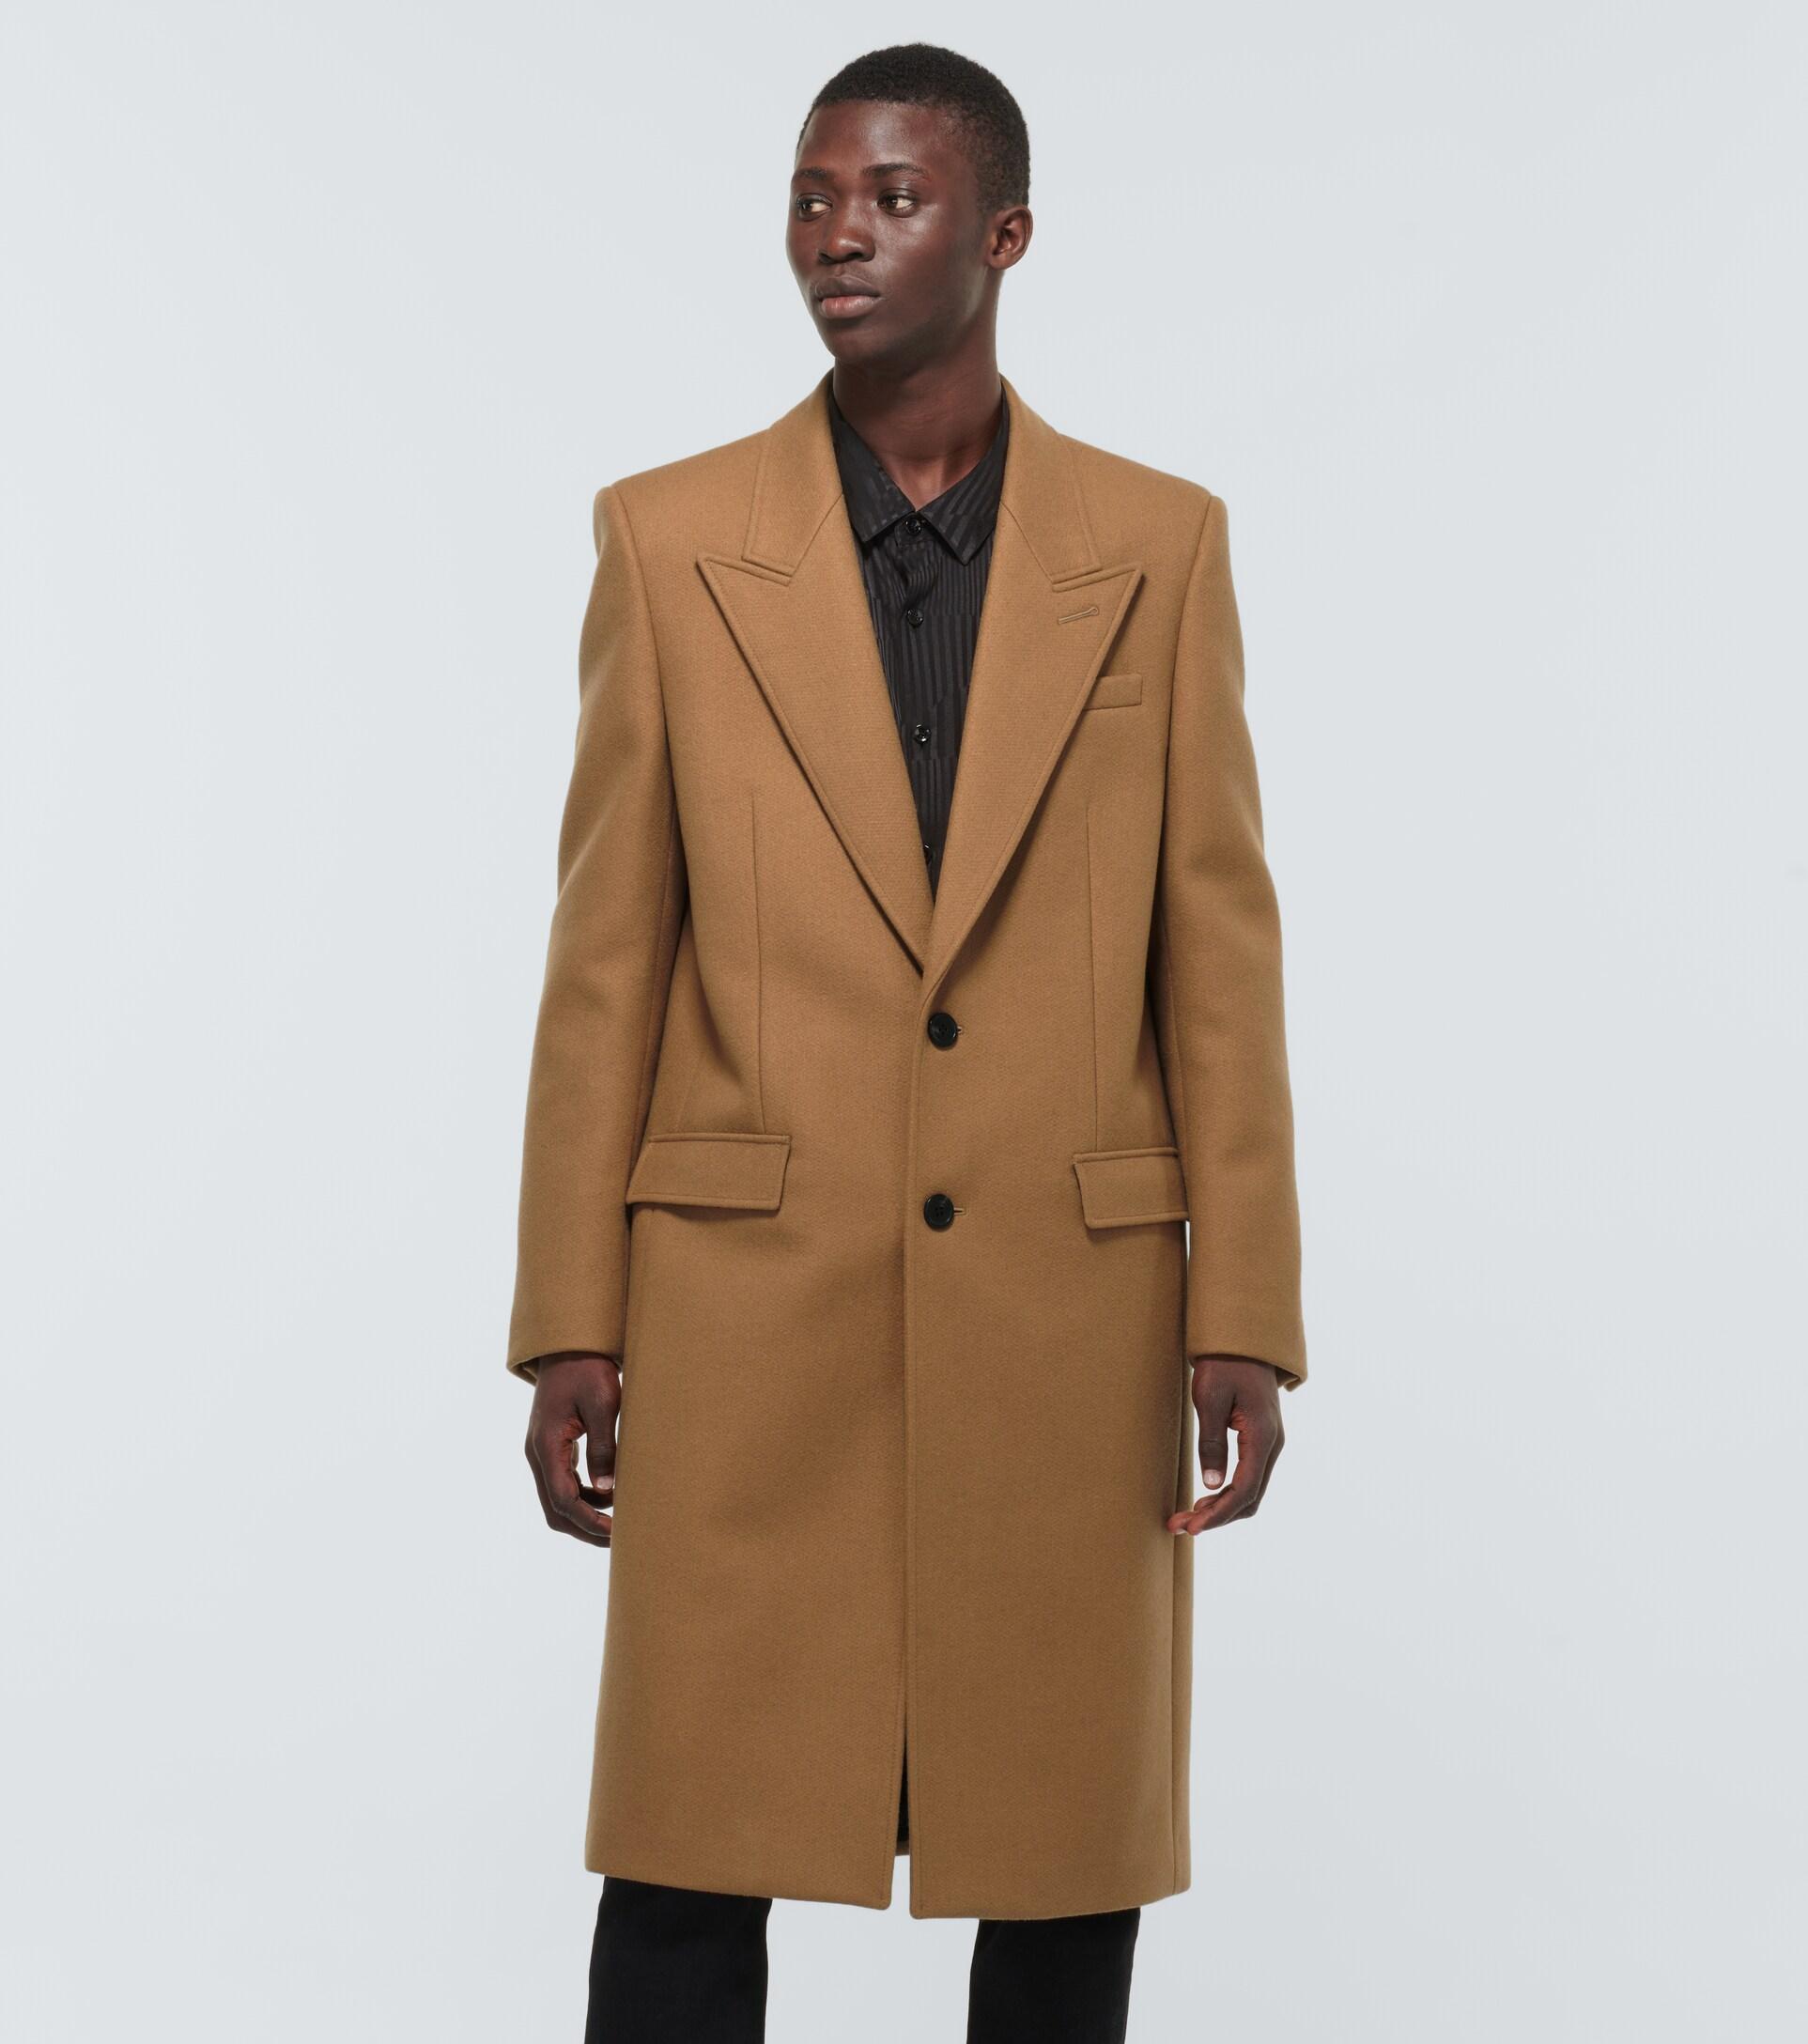 Saint Laurent Single-breasted Cashmere Overcoat in Brown for Men | Lyst